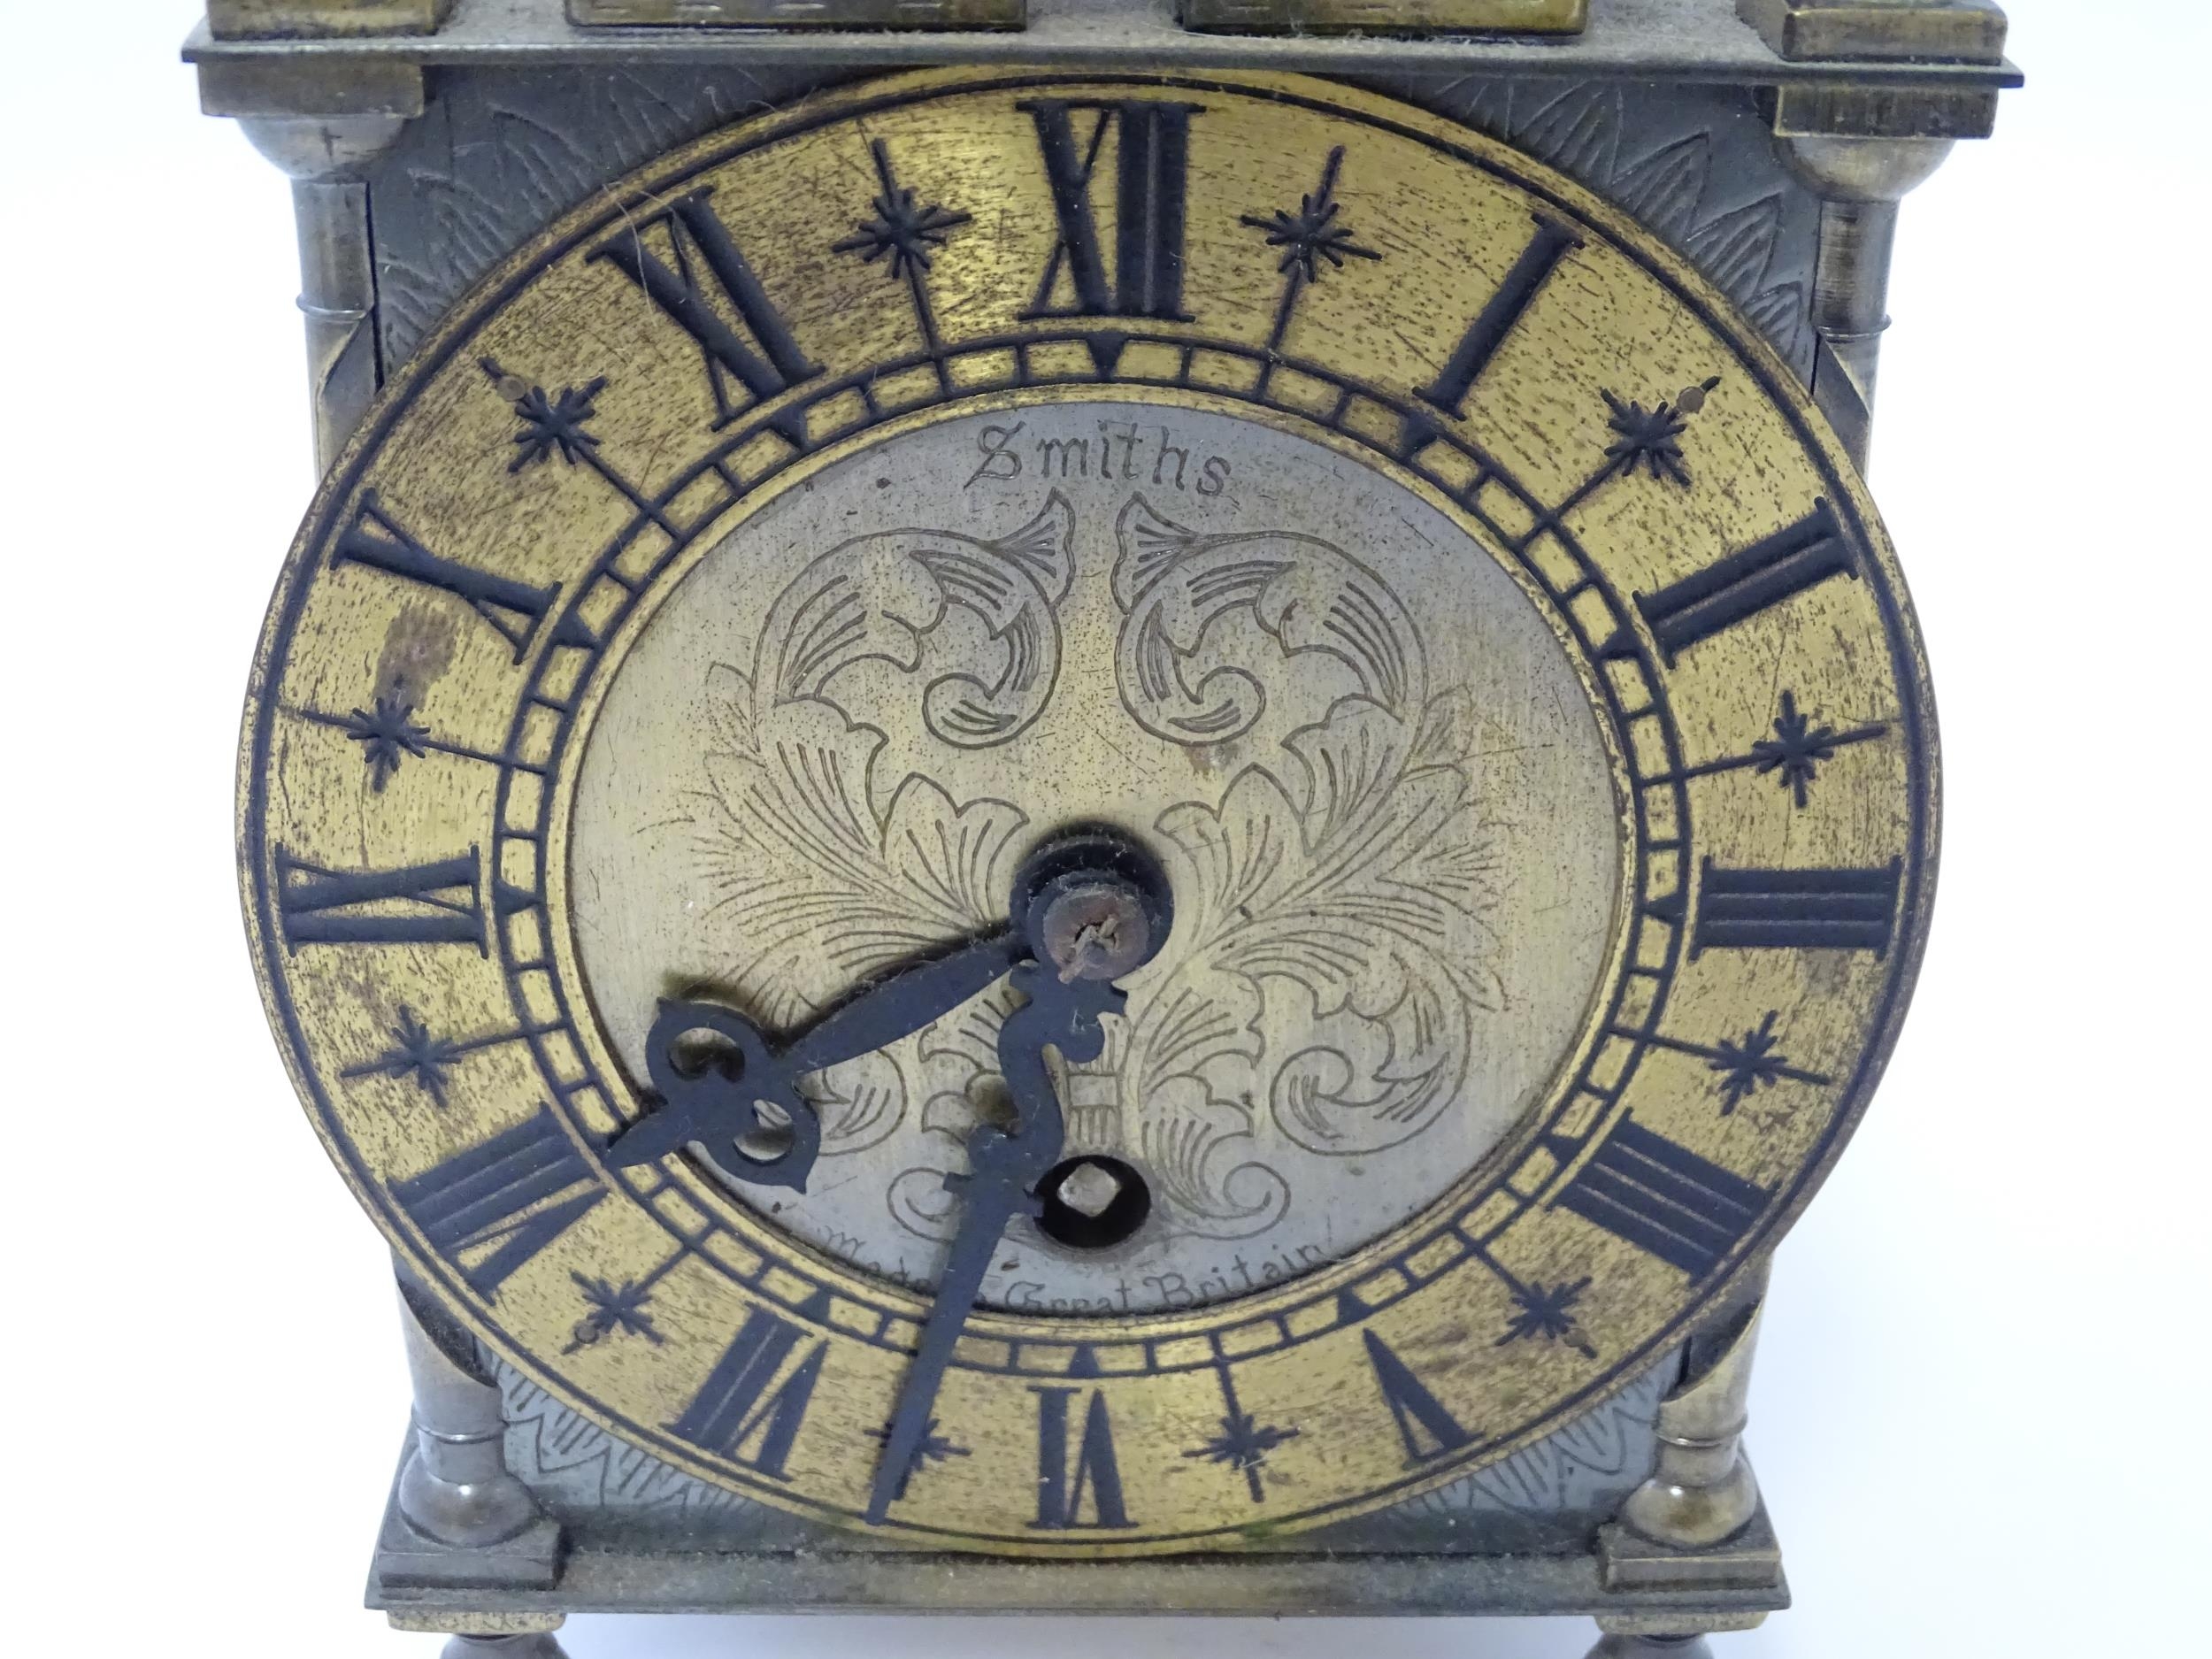 Smiths - Great Britain : A 20thC brass lantern clock by Smiths with engraved dial and Roman - Image 6 of 11